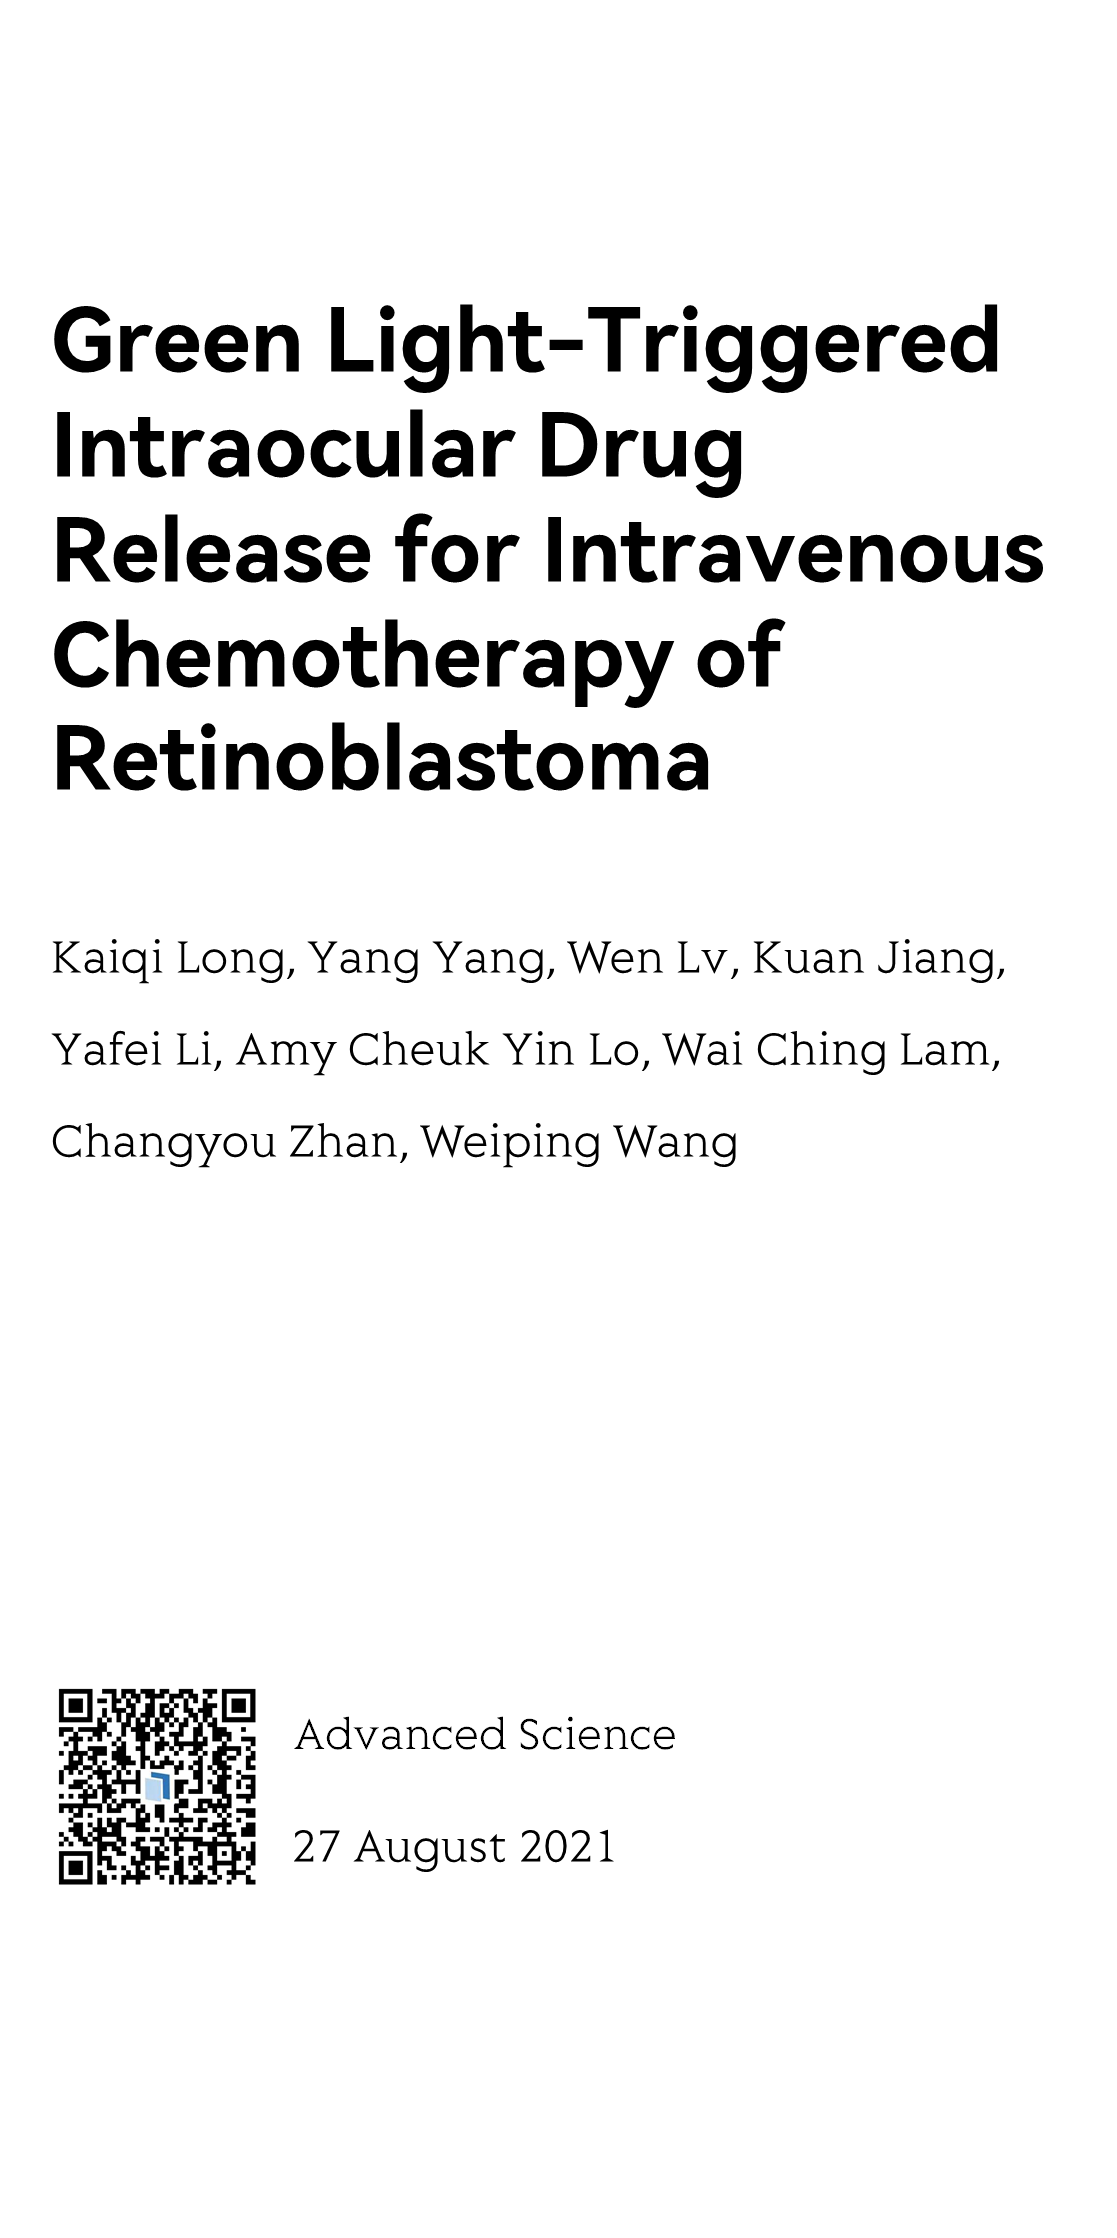 Green Light-Triggered Intraocular Drug Release for Intravenous Chemotherapy of Retinoblastoma_1